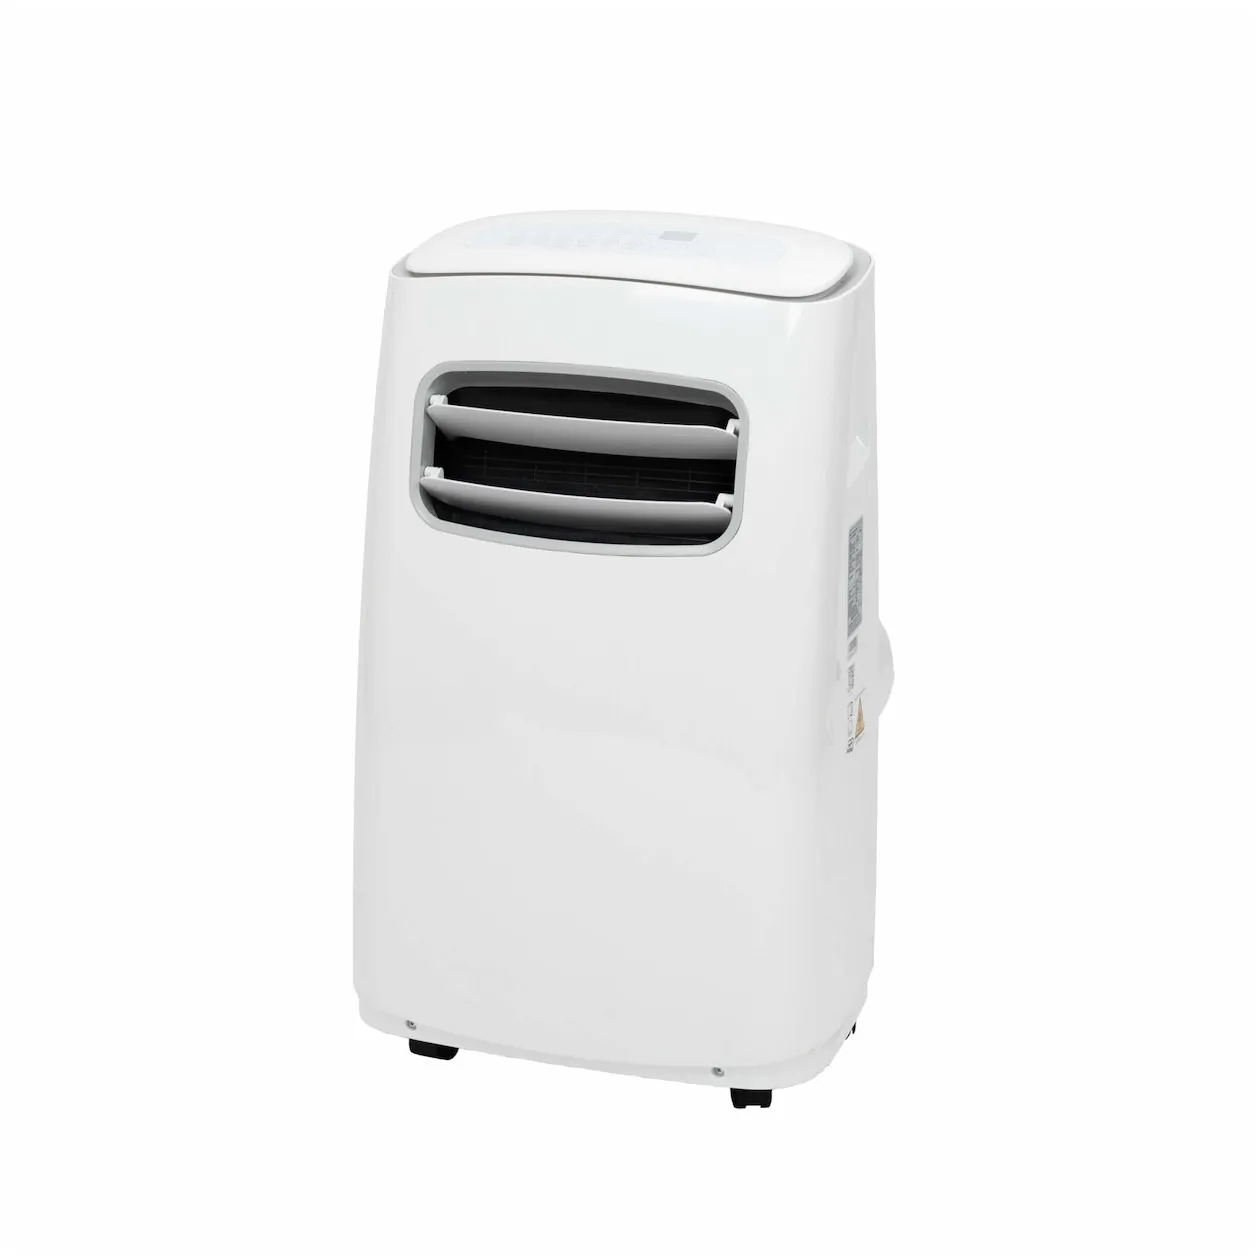 Eurom Coolsmart 120 Airconditioner